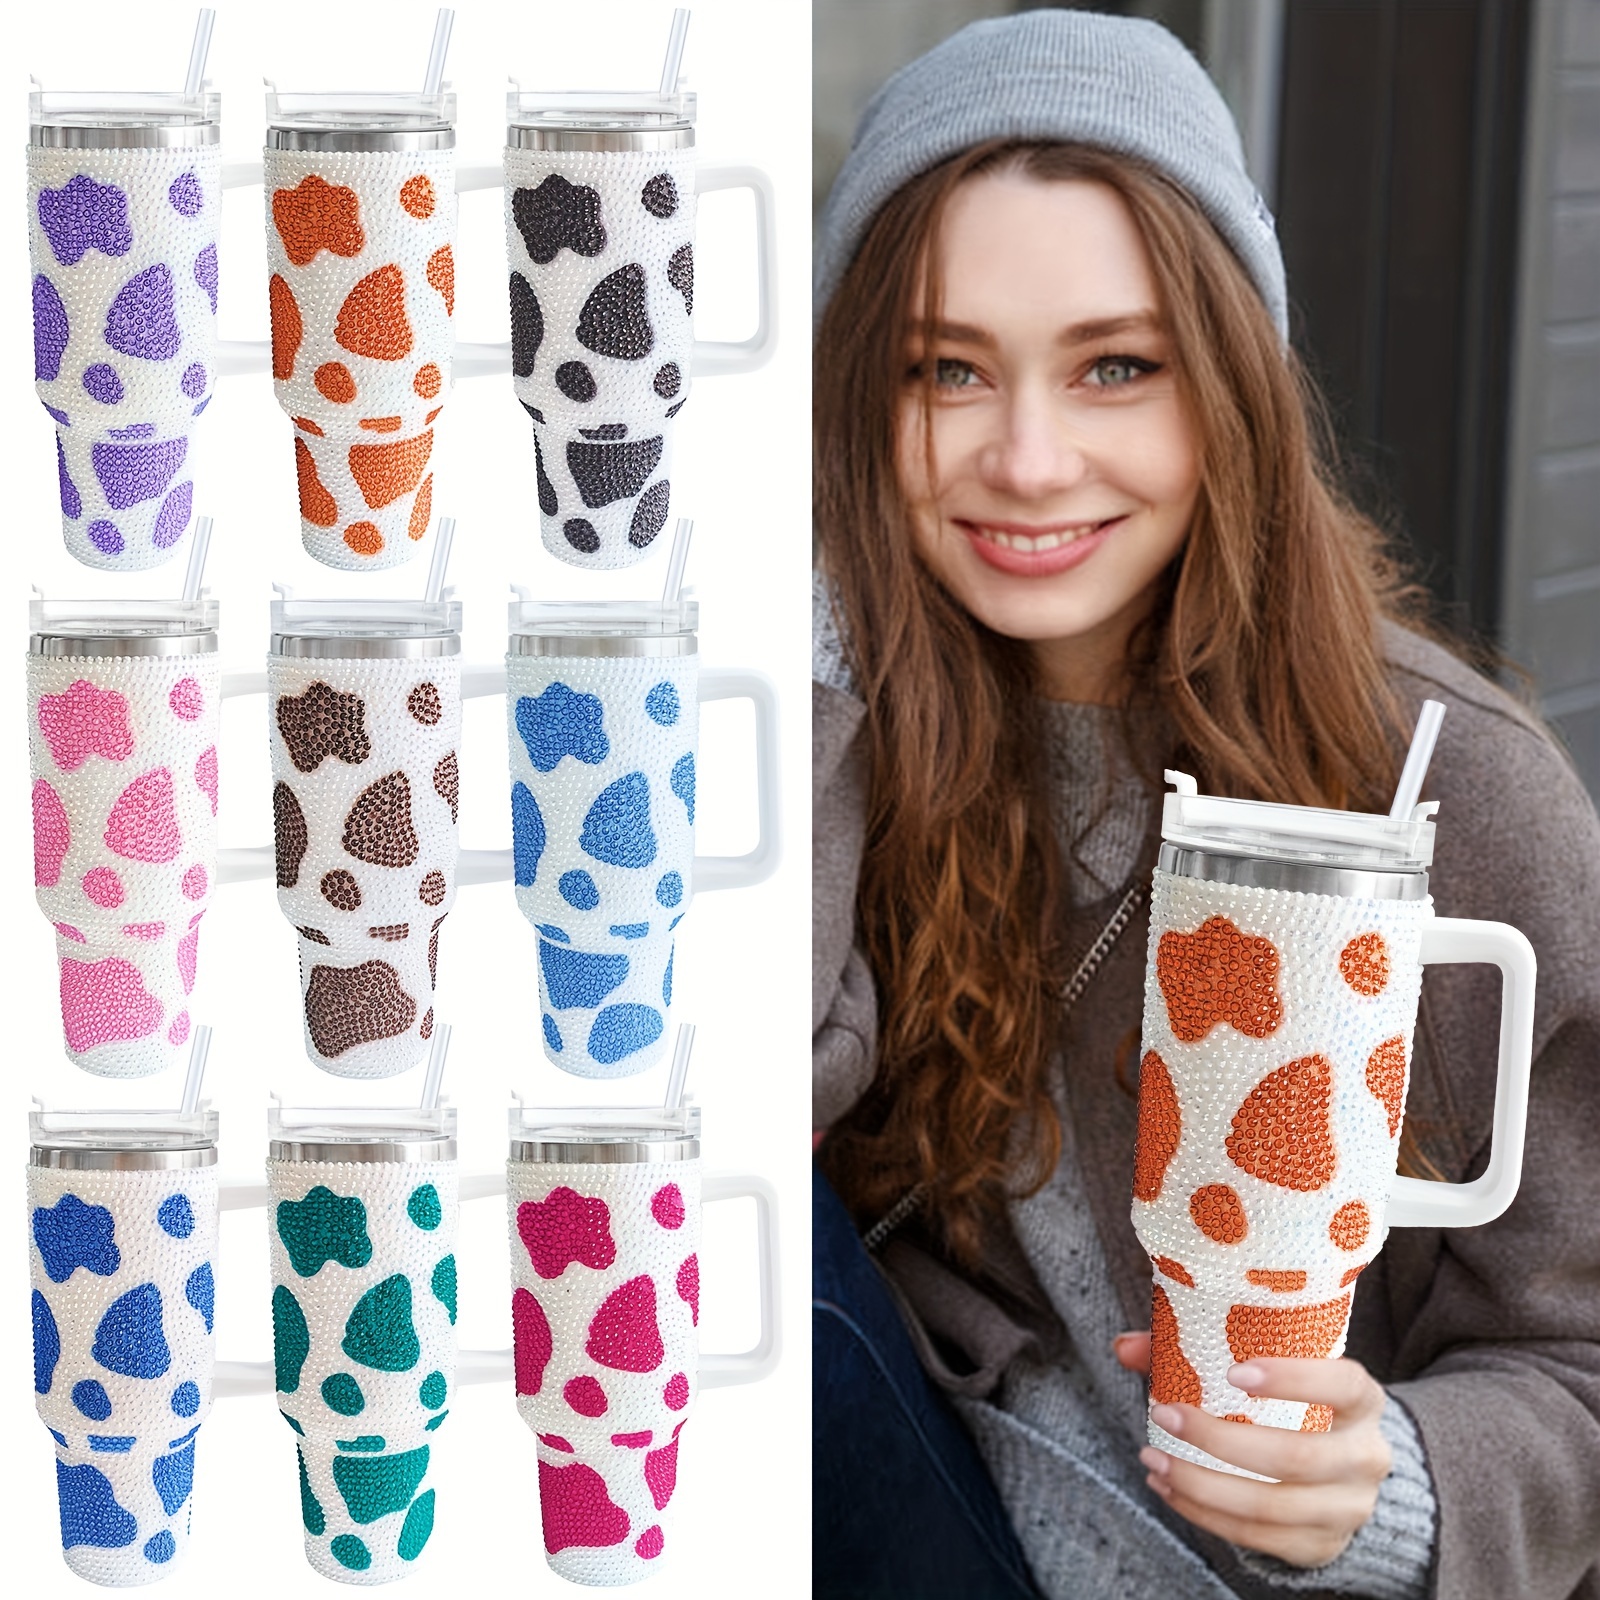 Cow Print Tumbler, 40 Oz Tumbler with Handle and Straw, Cute Cow Print Cup/Coffee  Mug/Travel Mug, Brown Cow Print Stuff/Decor, Fun Cow Gifts for Cow Lovers  Women, 40 Oz Stainless Steel Tumbler